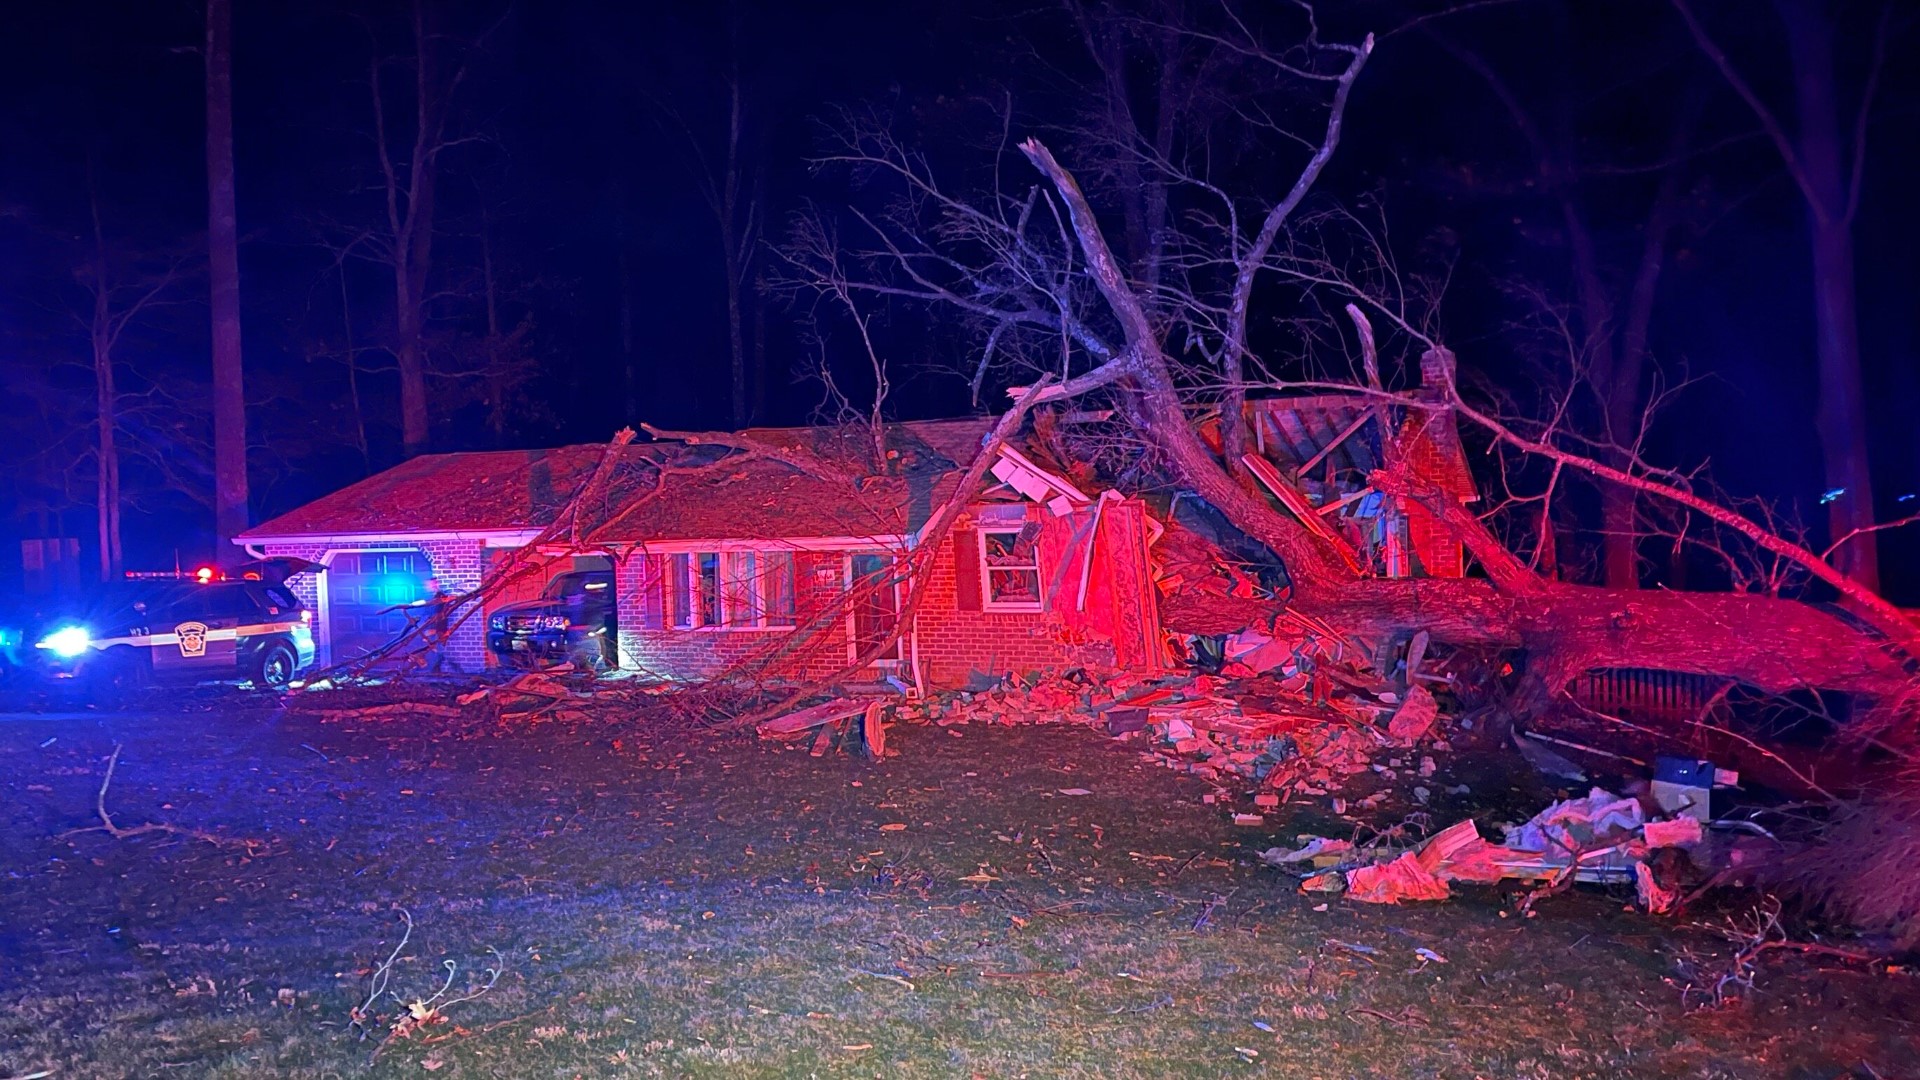 High winds caused a dead tree to fall into a house on Baltimore Pike, killing one resident, according to the South Middletown Fire Department.